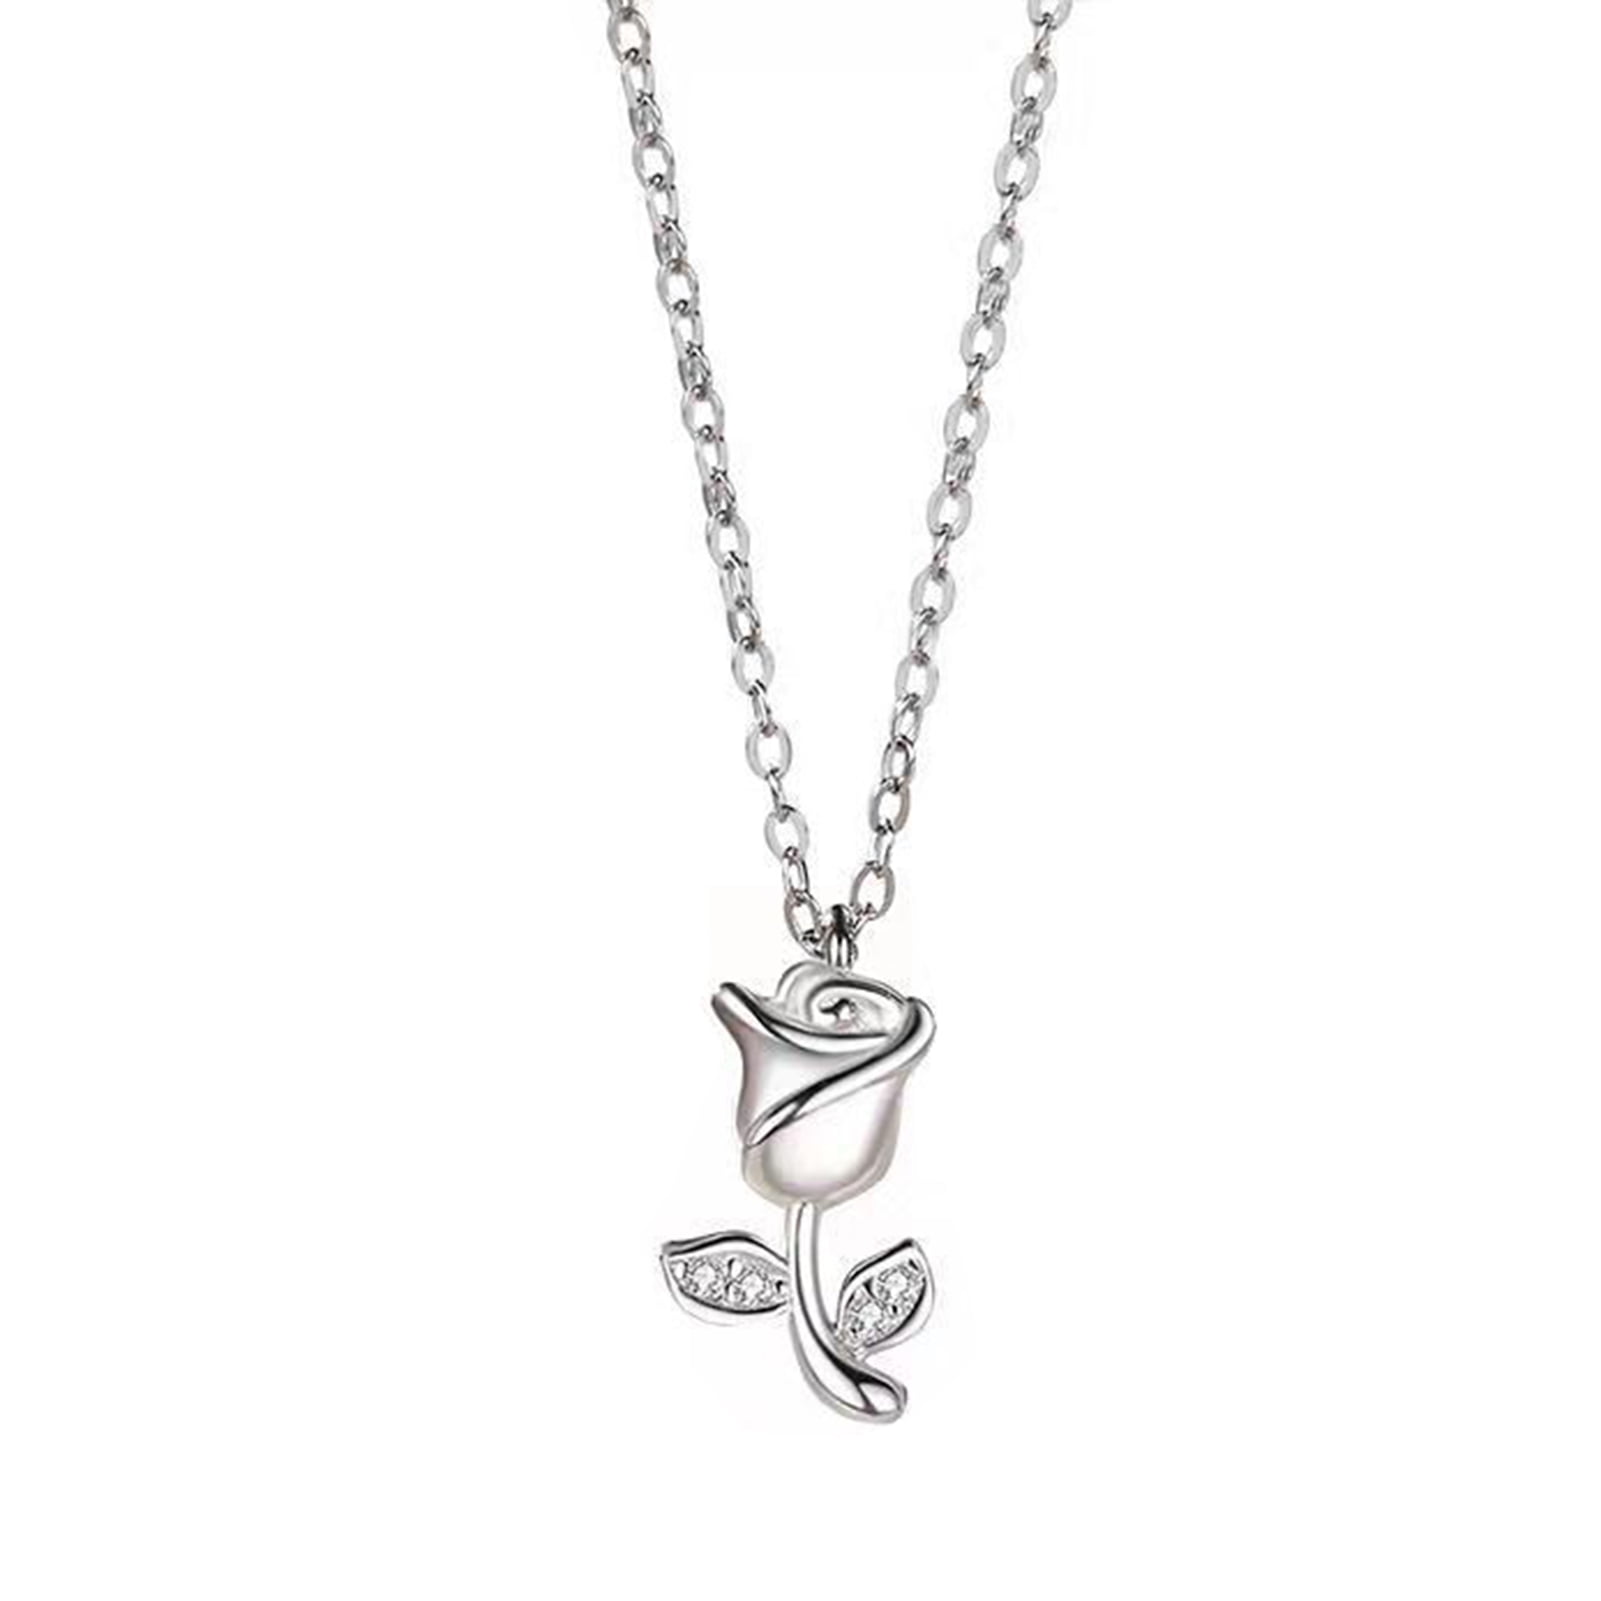 Buy Silver Plated My Heart Rose Pendant Necklace by Eina Ahluwalia Online  at Aza Fashions.